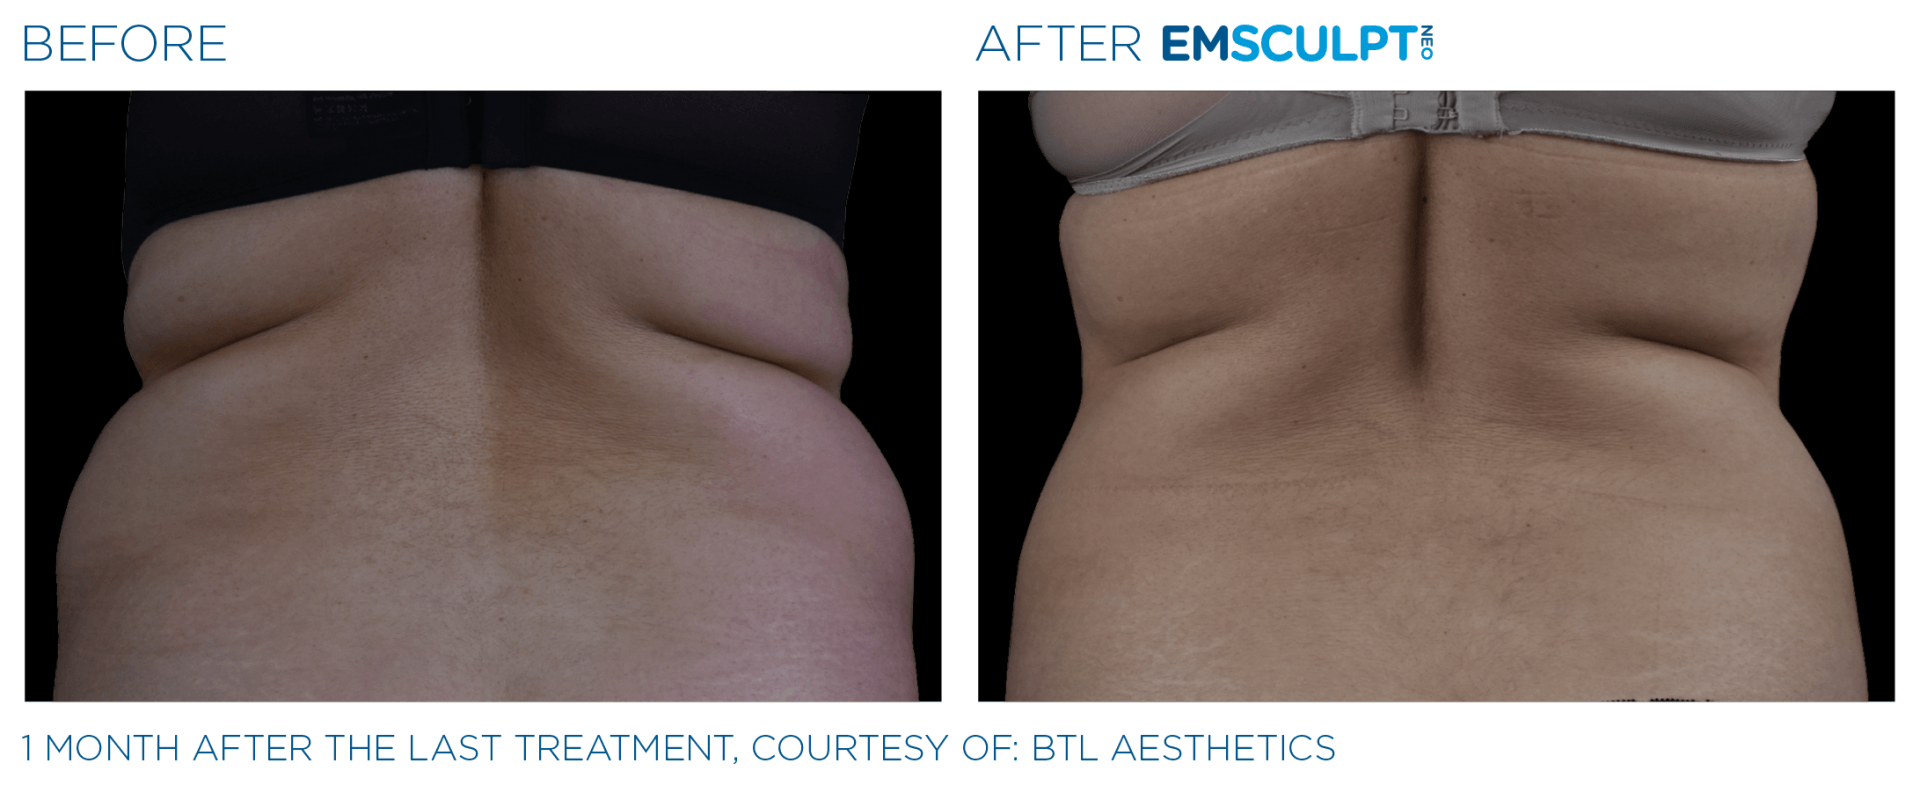 Bra roll results with Emsculpt neo at Dr. Mantor's Wrinkle and Weight Solutions in Westerville, OH book your free trial today!